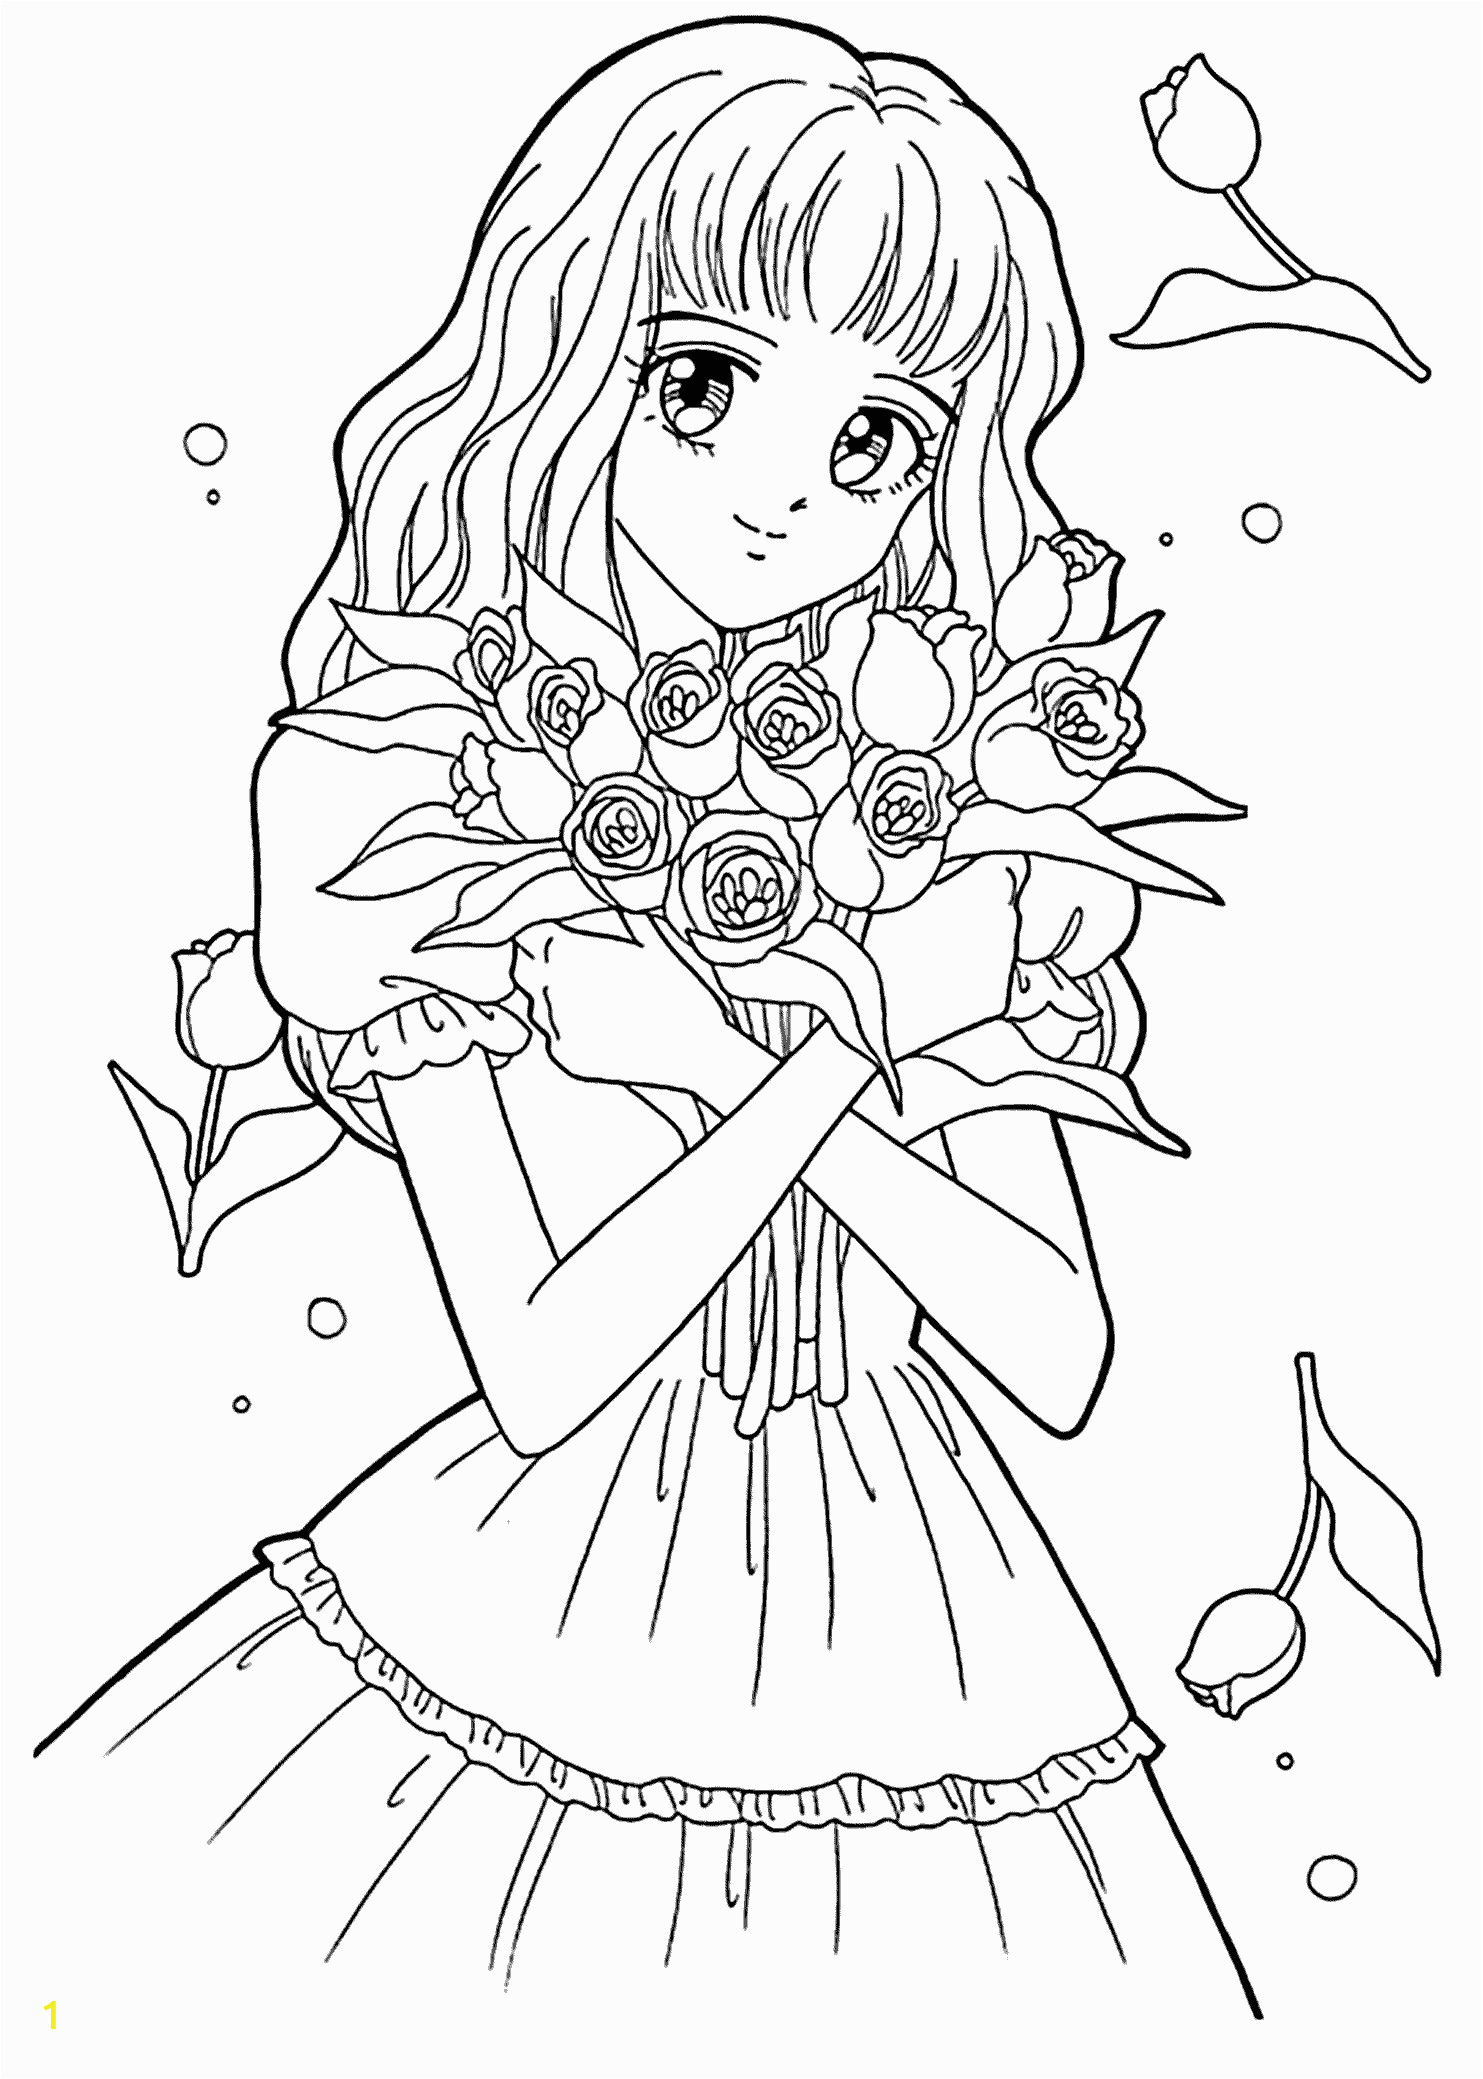 Coloring Pages for Teenage Girl to Print Best Free Printable Coloring Pages for Kids and Teens